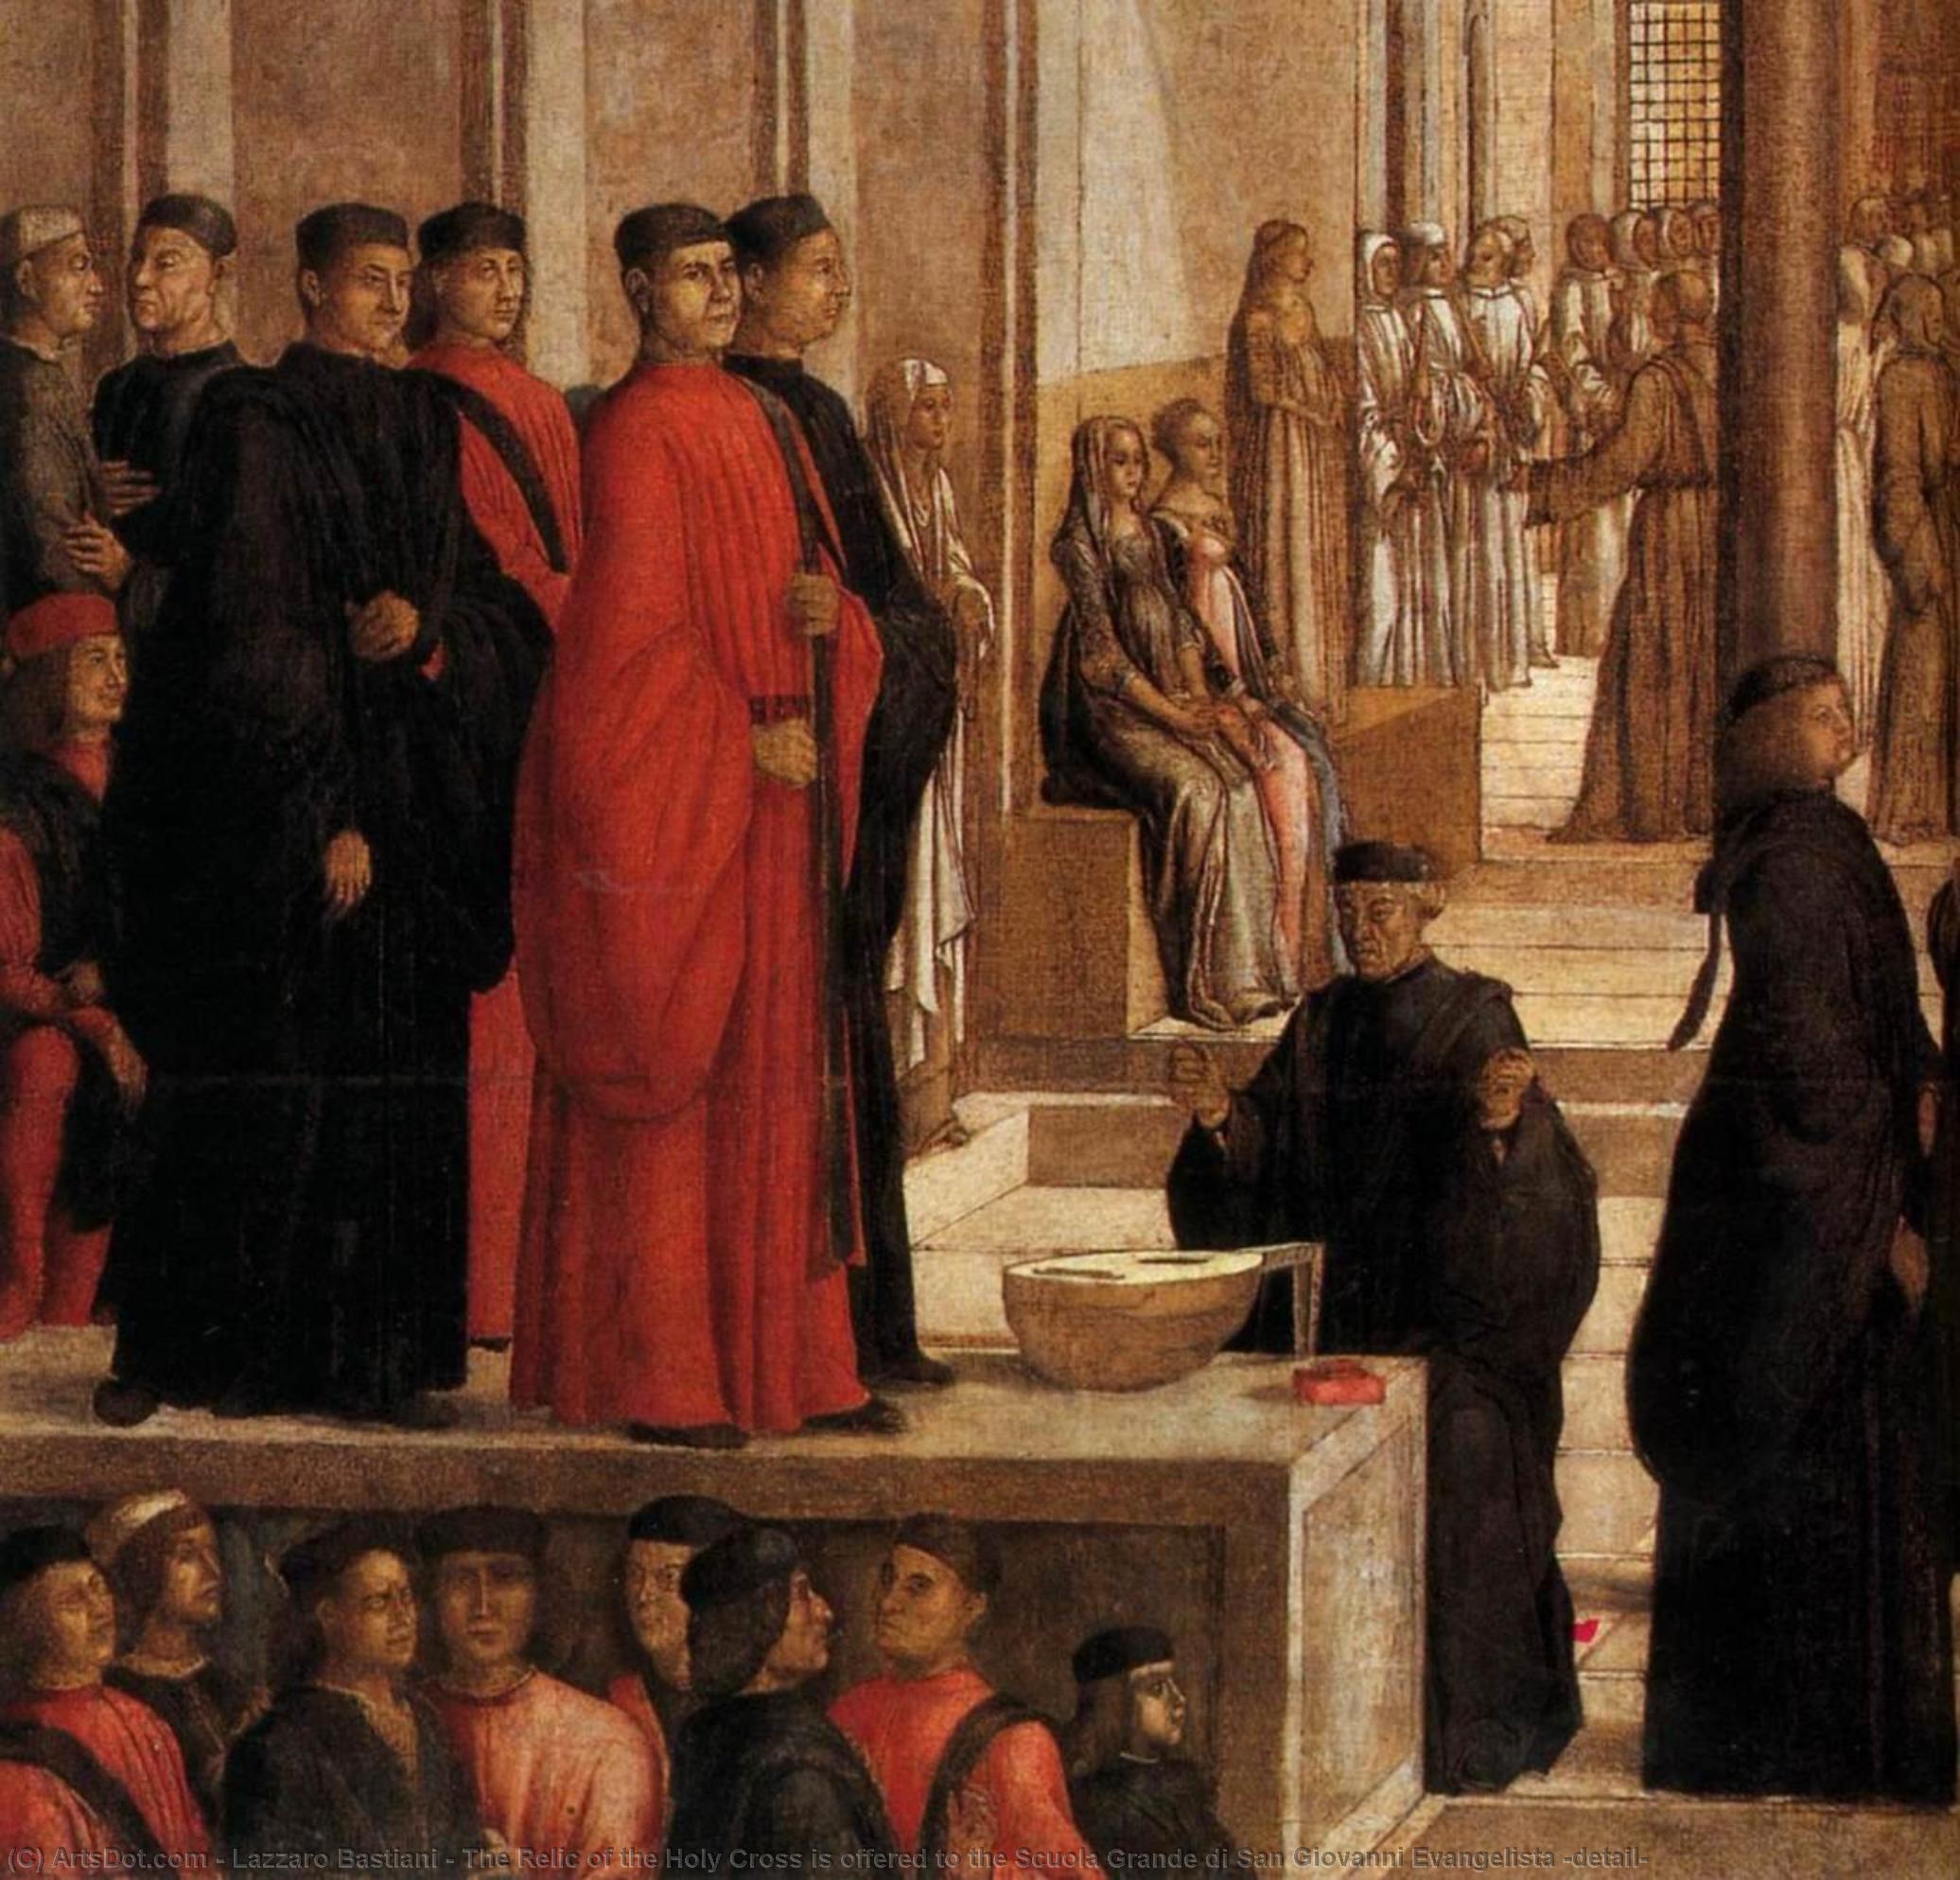 WikiOO.org - Encyclopedia of Fine Arts - Målning, konstverk Lazzaro Bastiani - The Relic of the Holy Cross is offered to the Scuola Grande di San Giovanni Evangelista (detail)